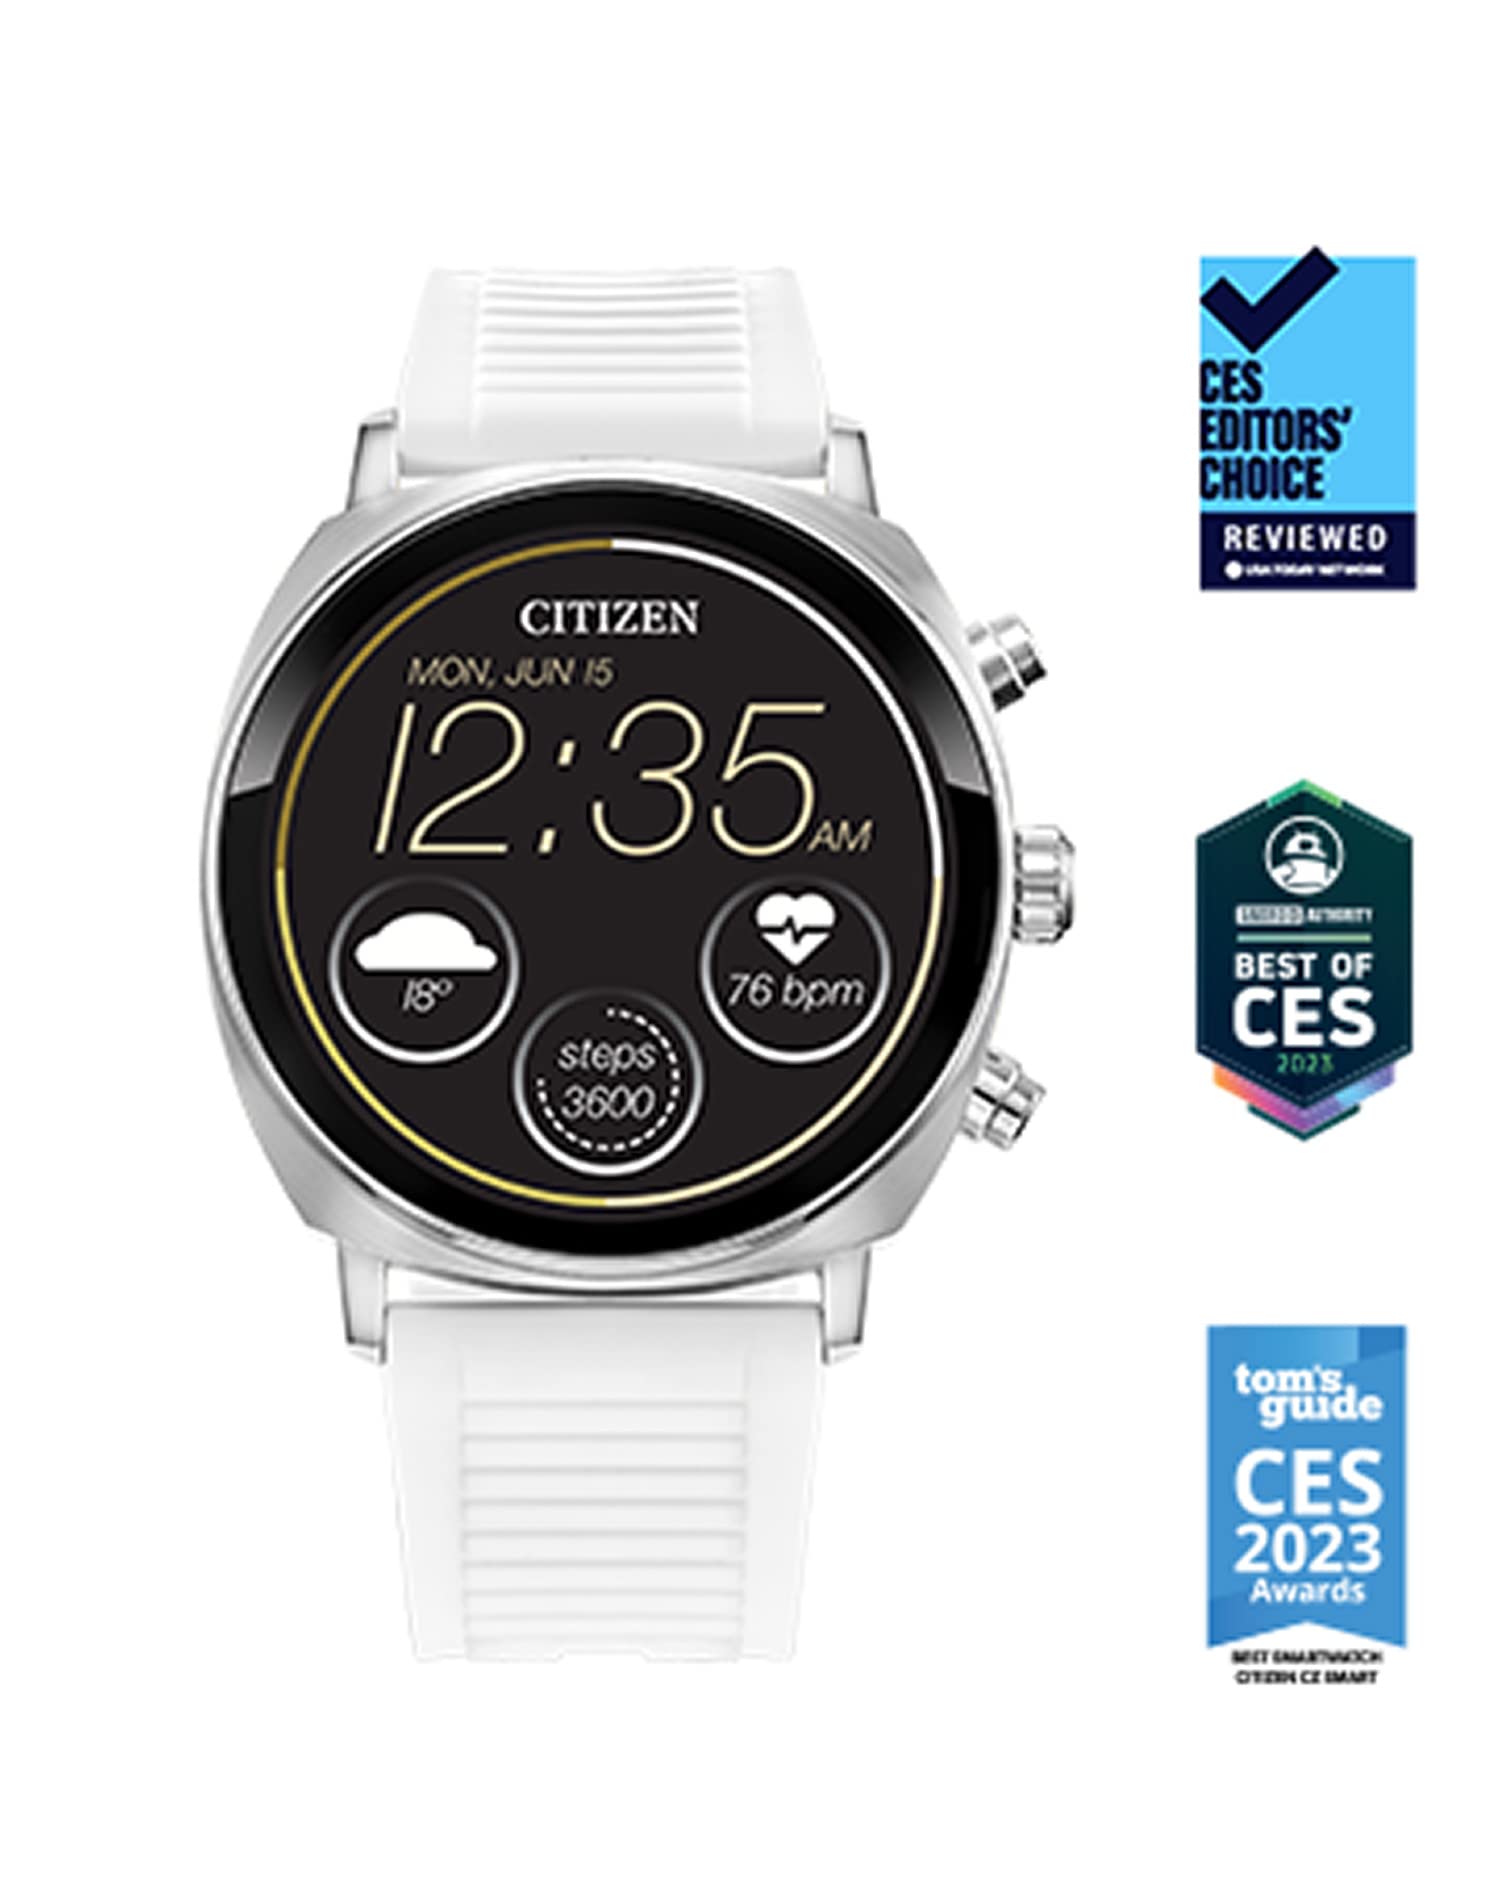 Citizen CZ Smart Gen 2 41MM Unisex Casual Smartwatch with YouQ App Featuring IBM Watson® AI and NASA Research, Touchscreen, Wear OS by Google™, HR, GPS, Activity Tracker, Amazon Alexa™ Built-in